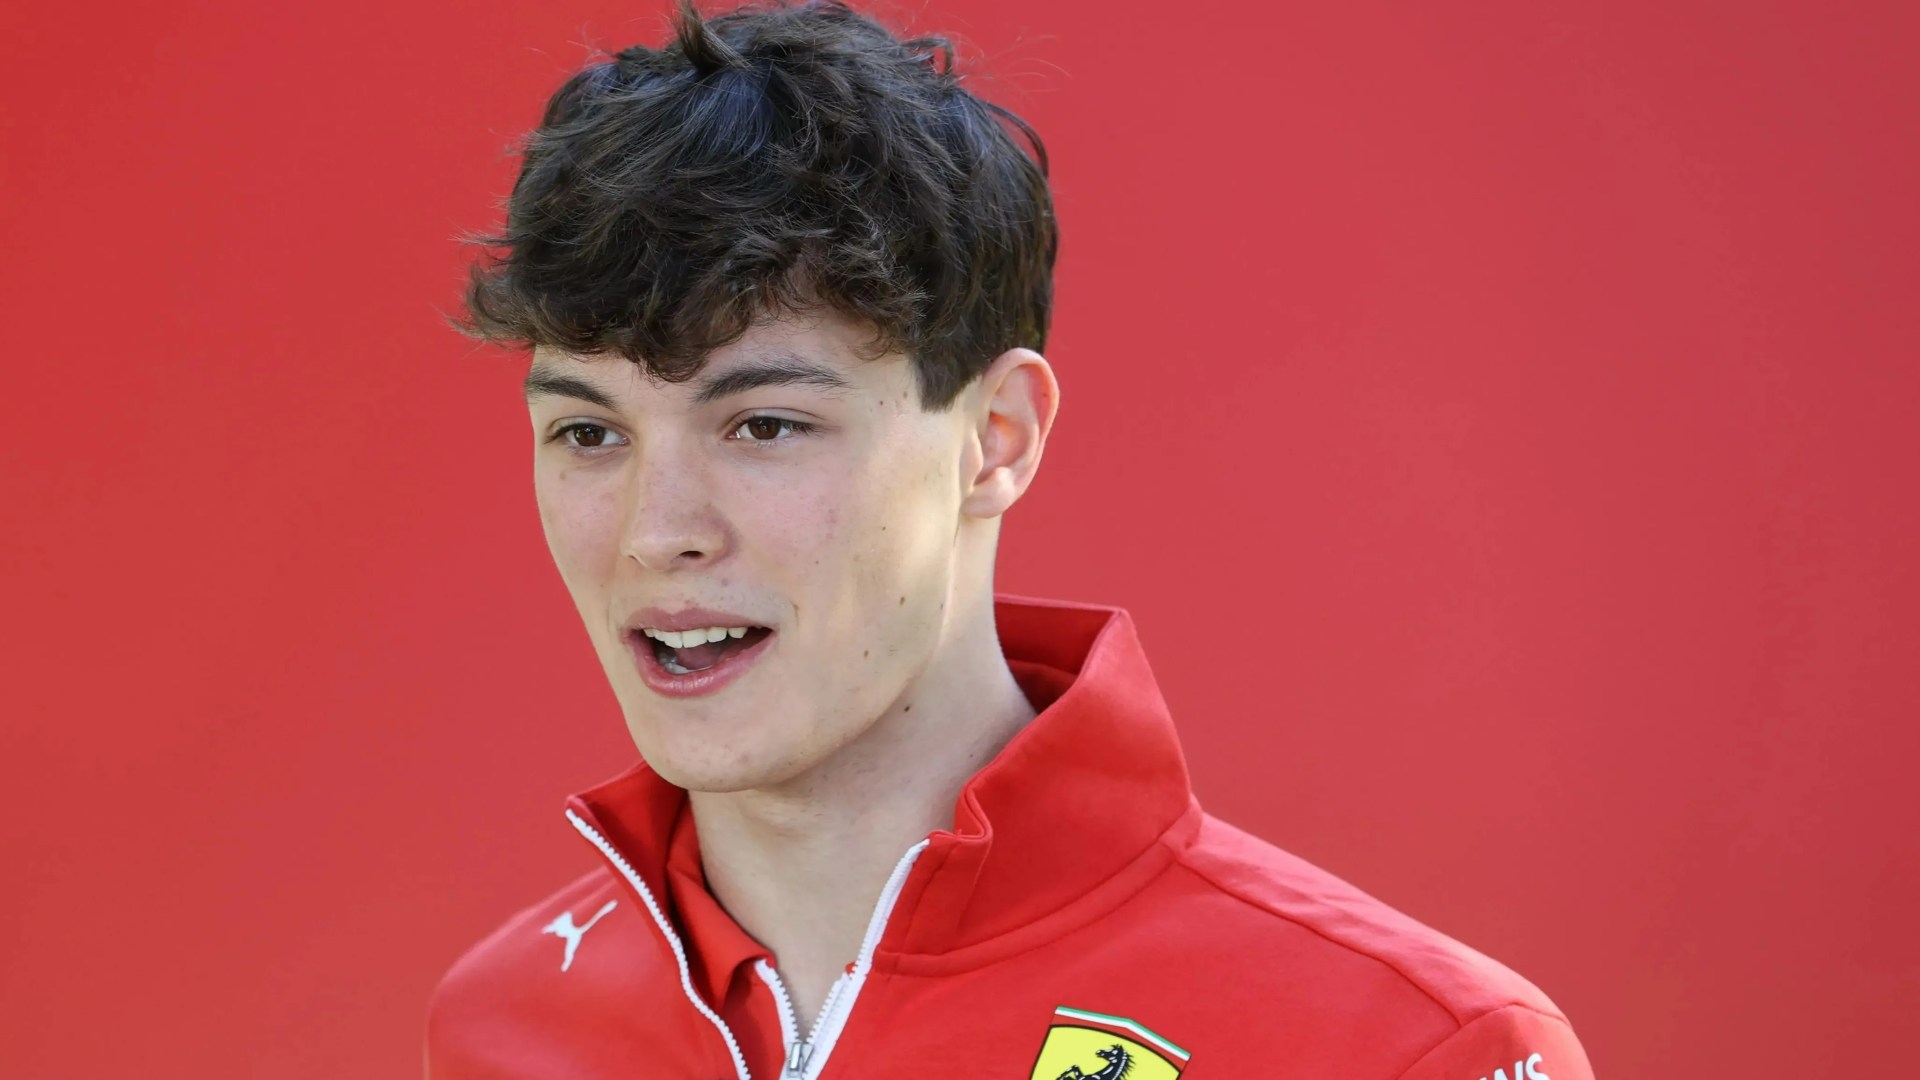 Ollie Bearman, 18, suffers horror return to F2 as Ferrari reserve hit with two penalty points on F1 superlicence